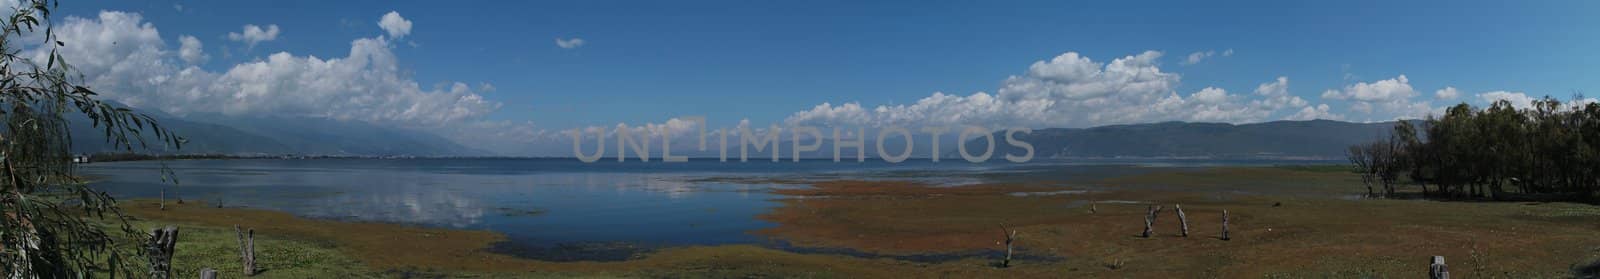 Panoramic photo of the lake of Dali, in China. This photo is made attaching together various photos.